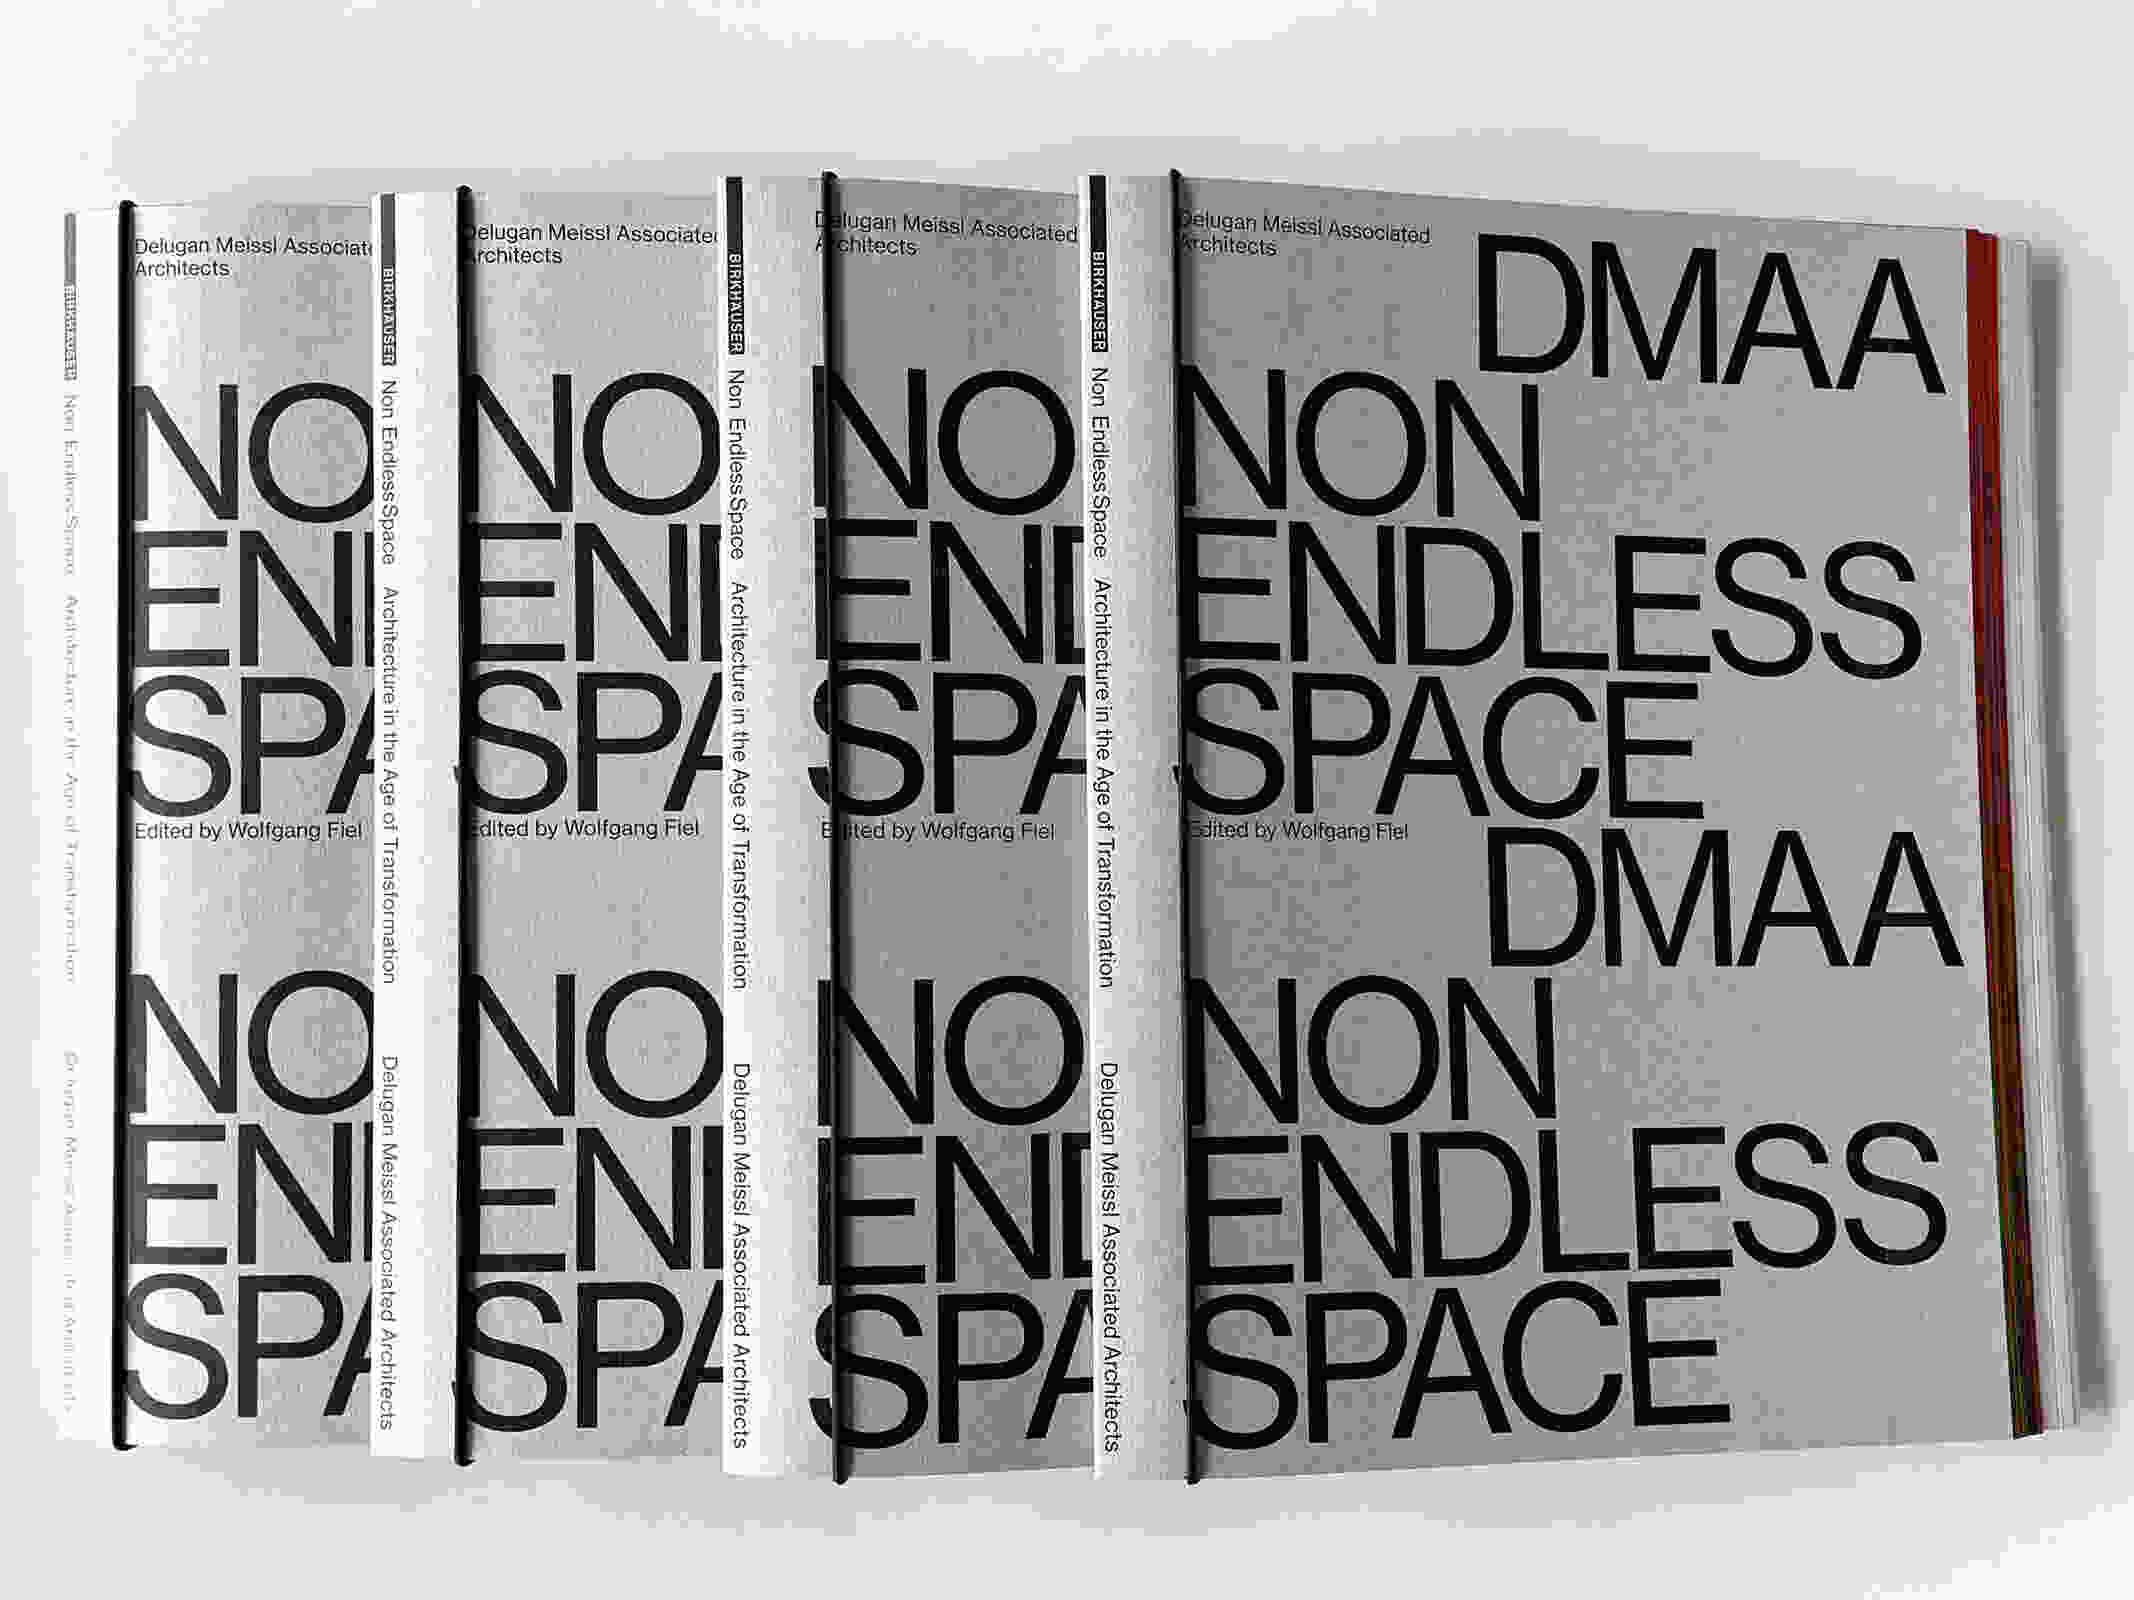 DMAA NON ENDLESS SPACE COVER